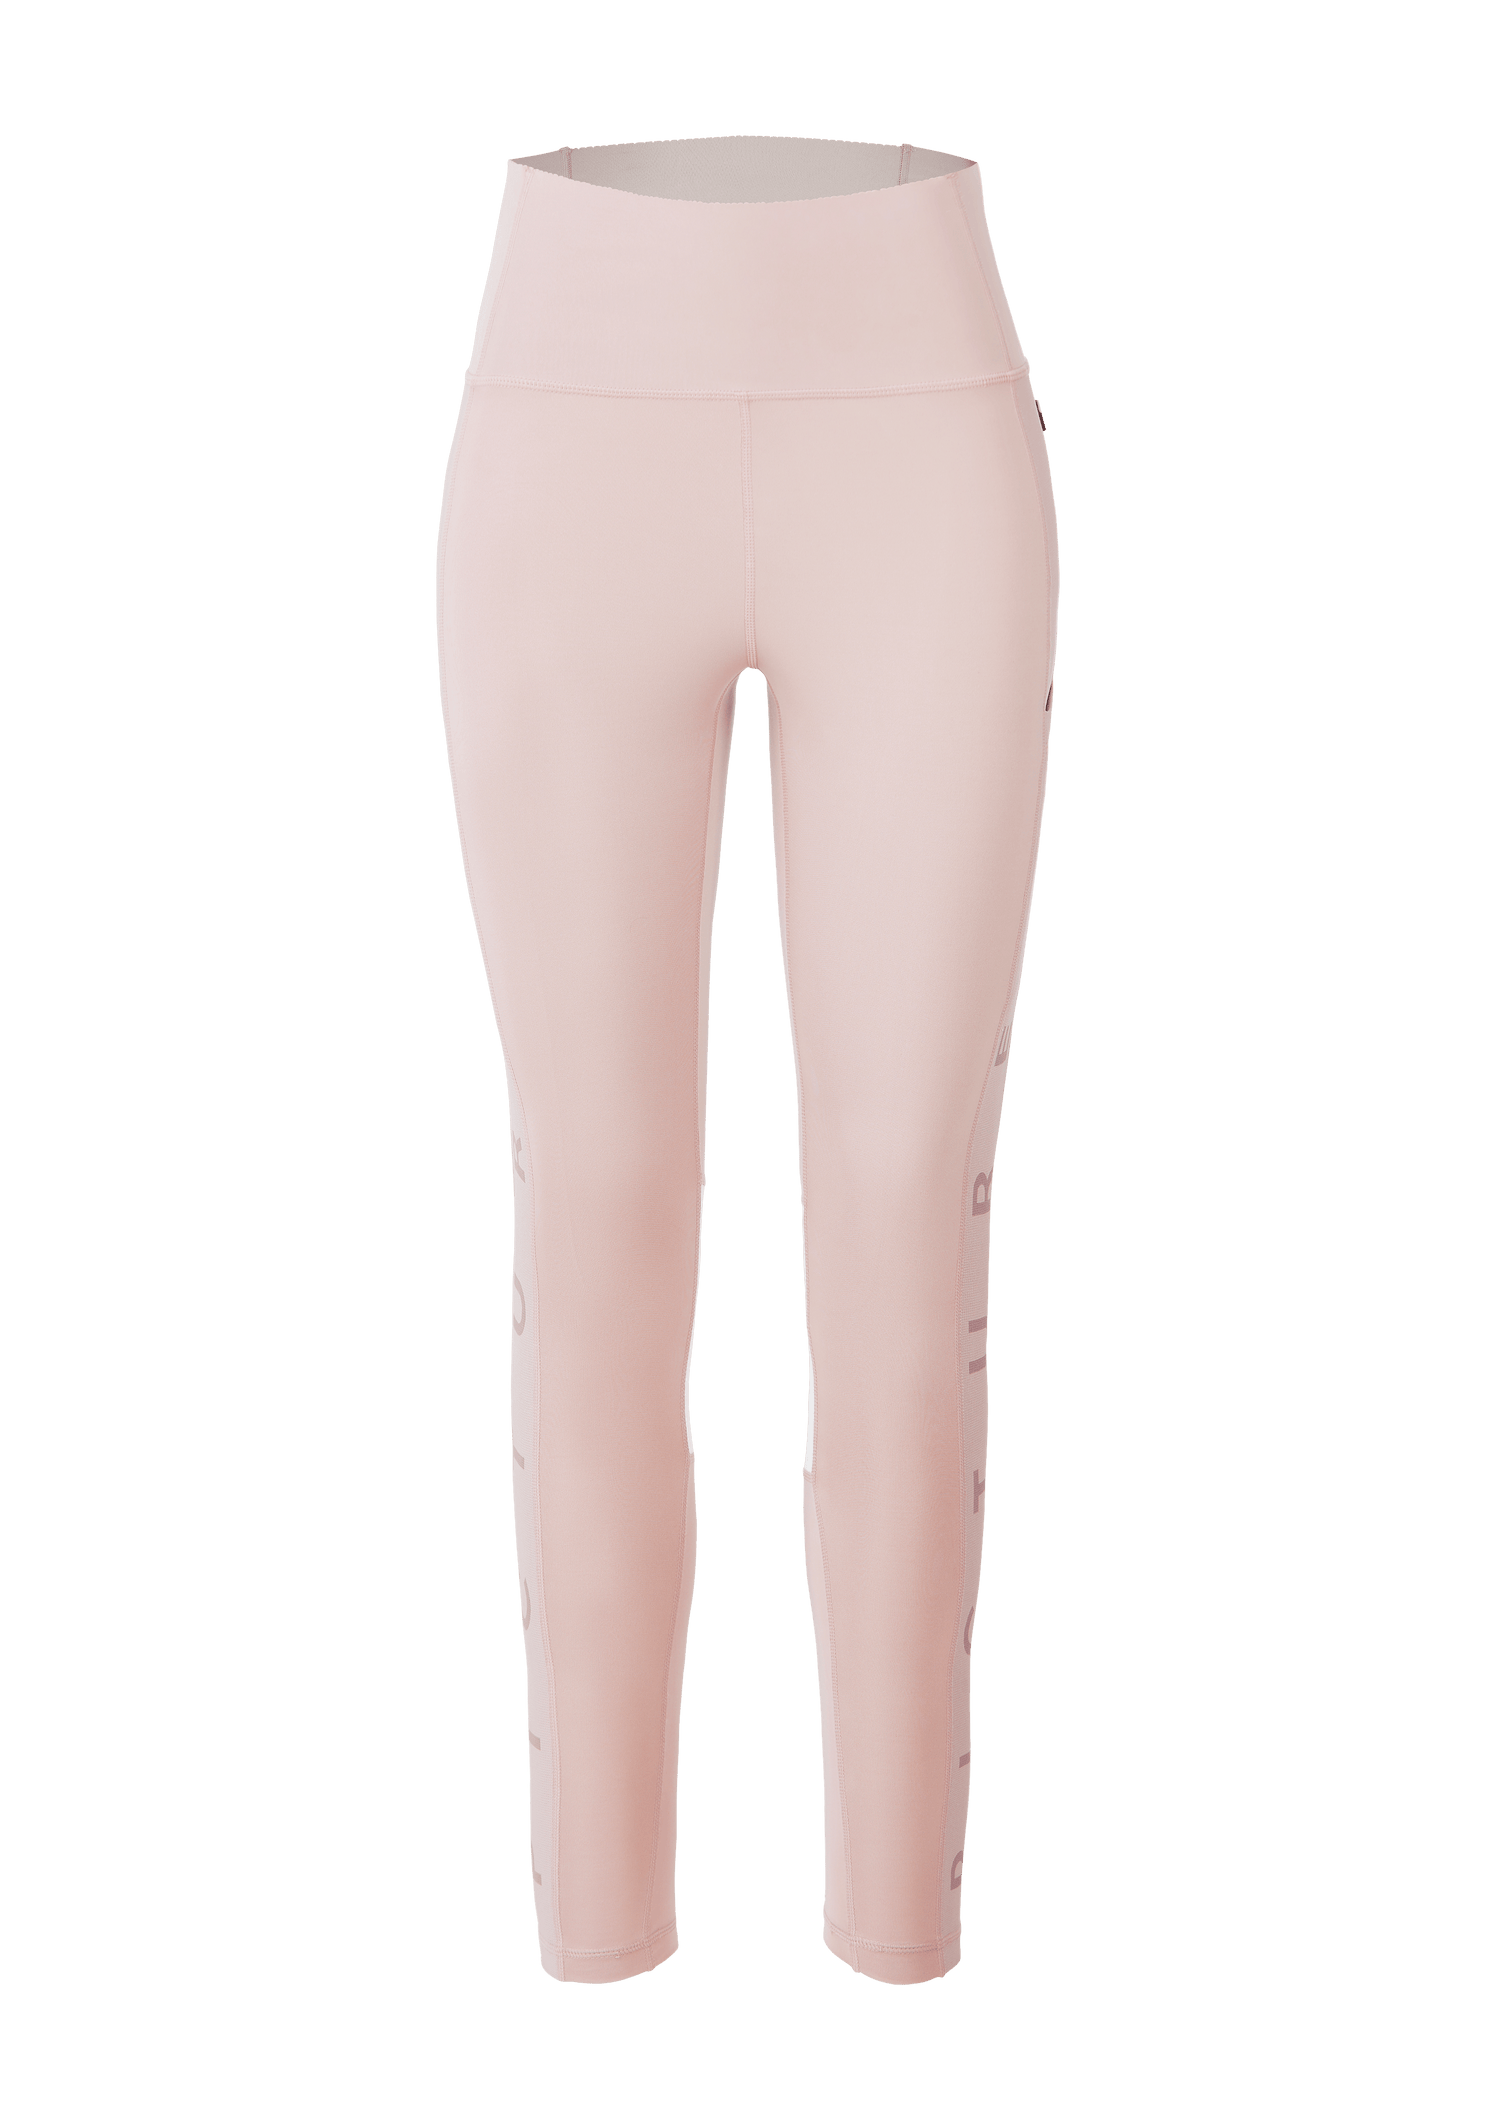 Picture Organic Women's Cintra Tech Leggings - Recycled Polyester